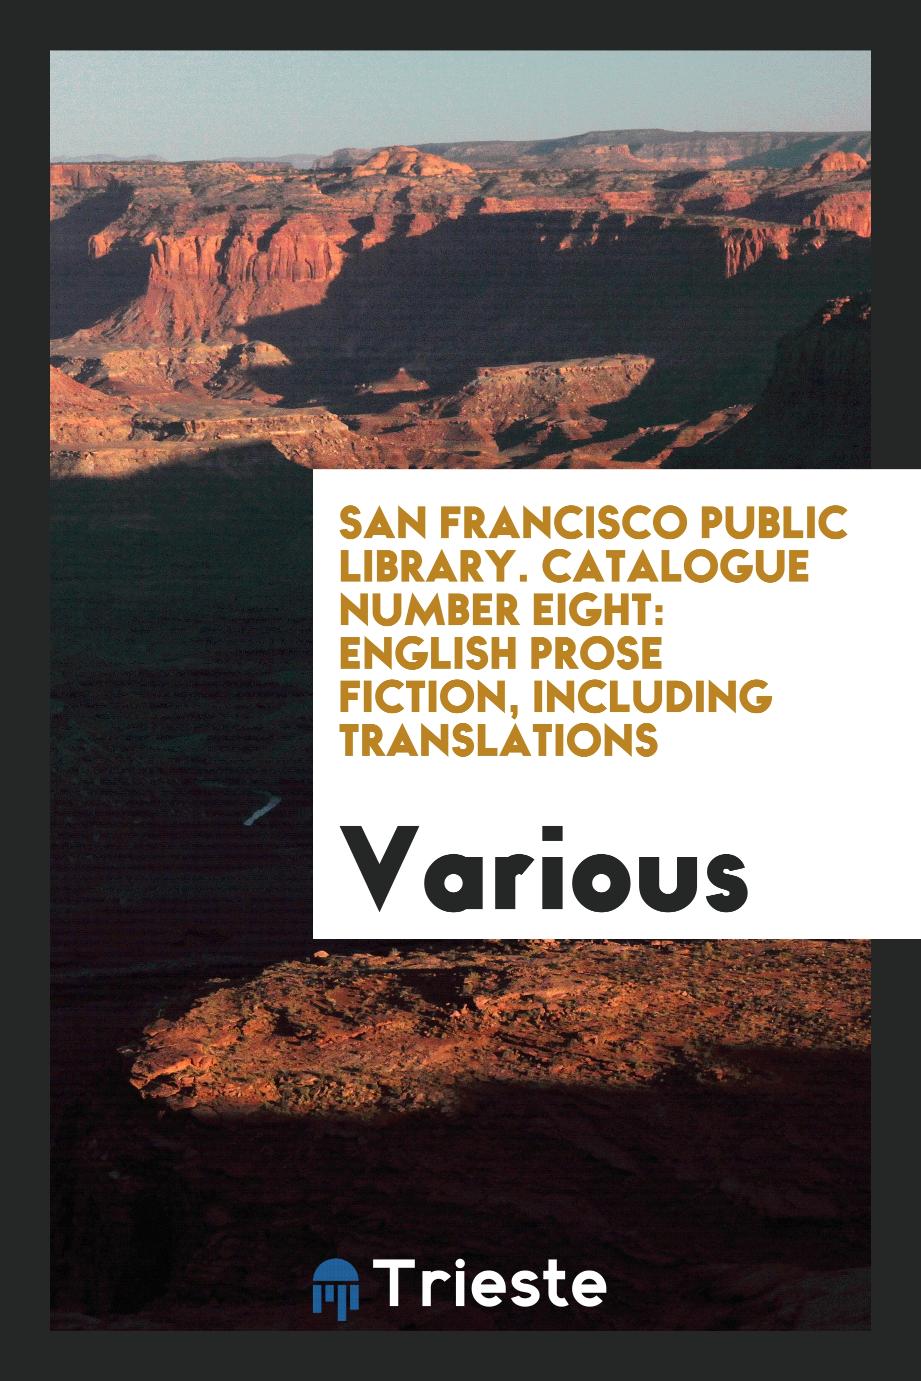 San Francisco Public Library. Catalogue Number Eight: English Prose Fiction, Including Translations